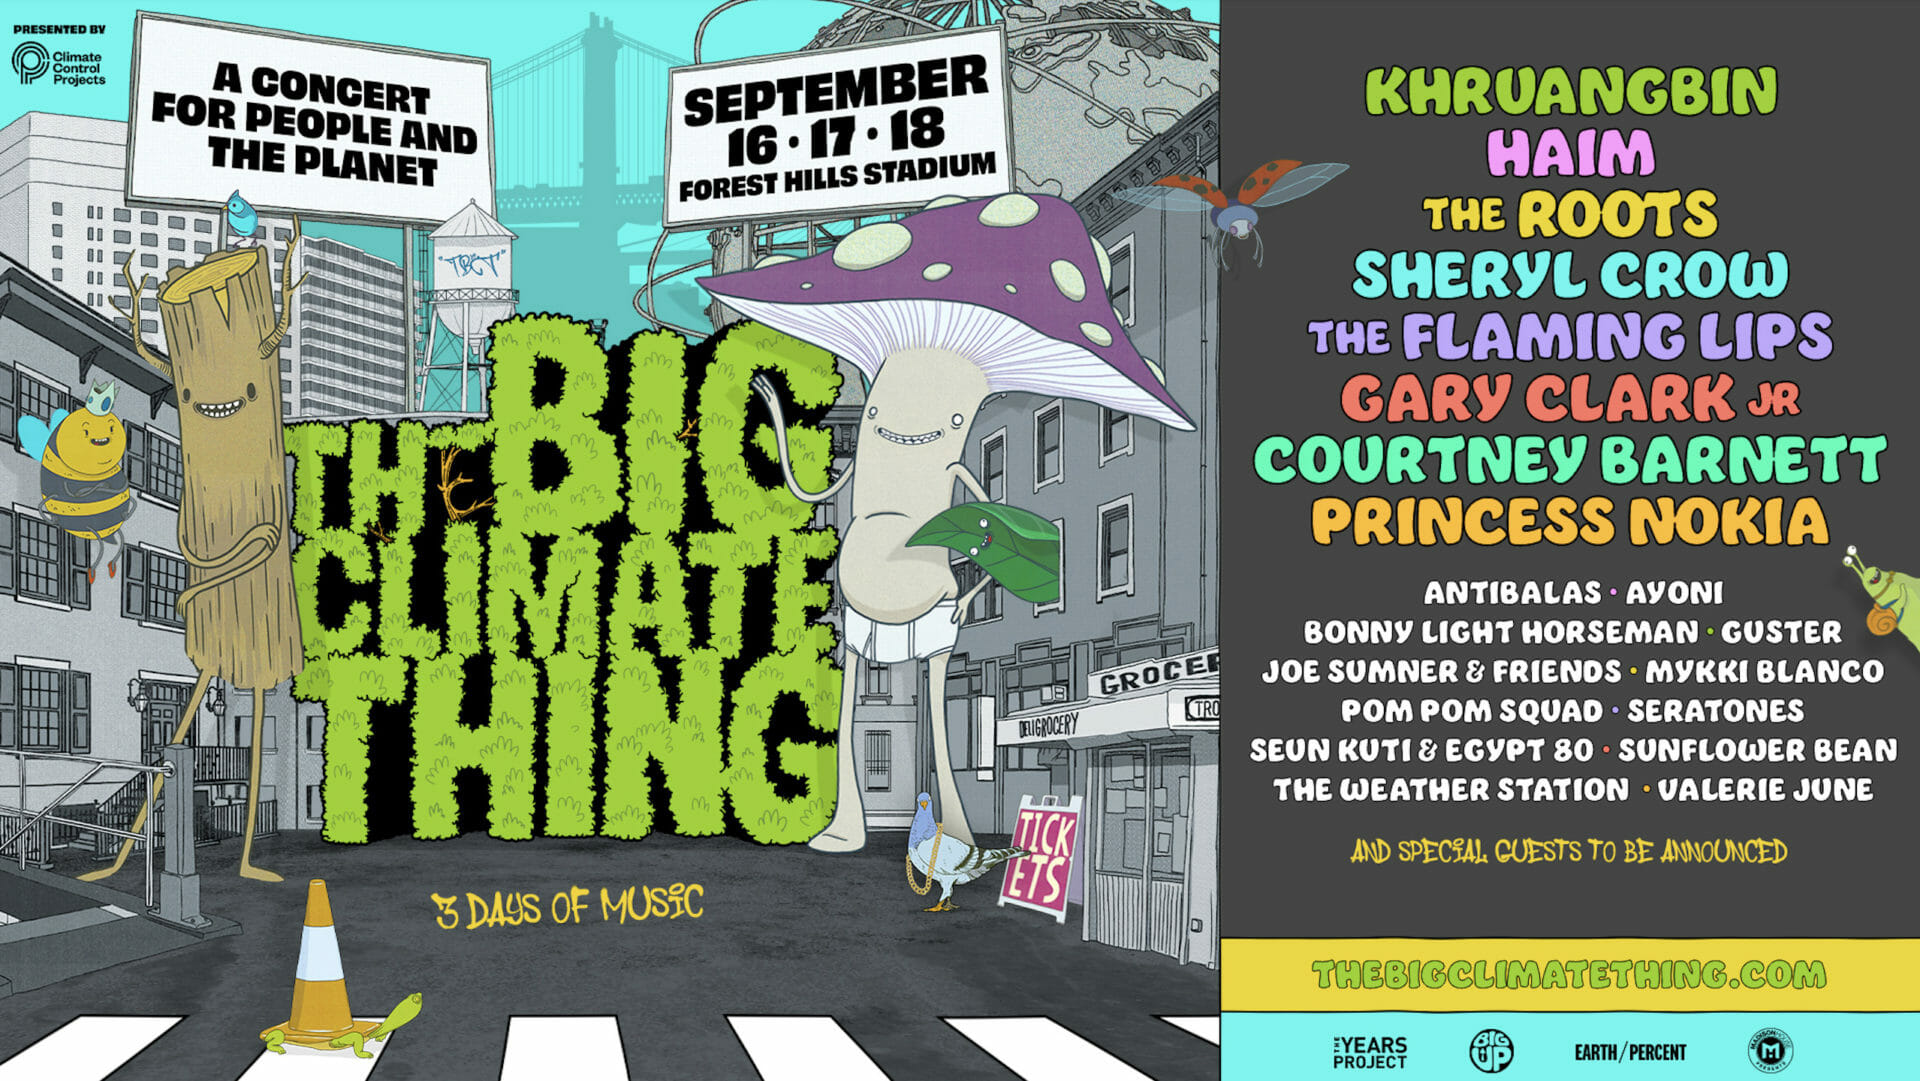 The Big Climate Thing Shares First-Ever Artist Lineup: Khruangbin, Haim, The Roots and More